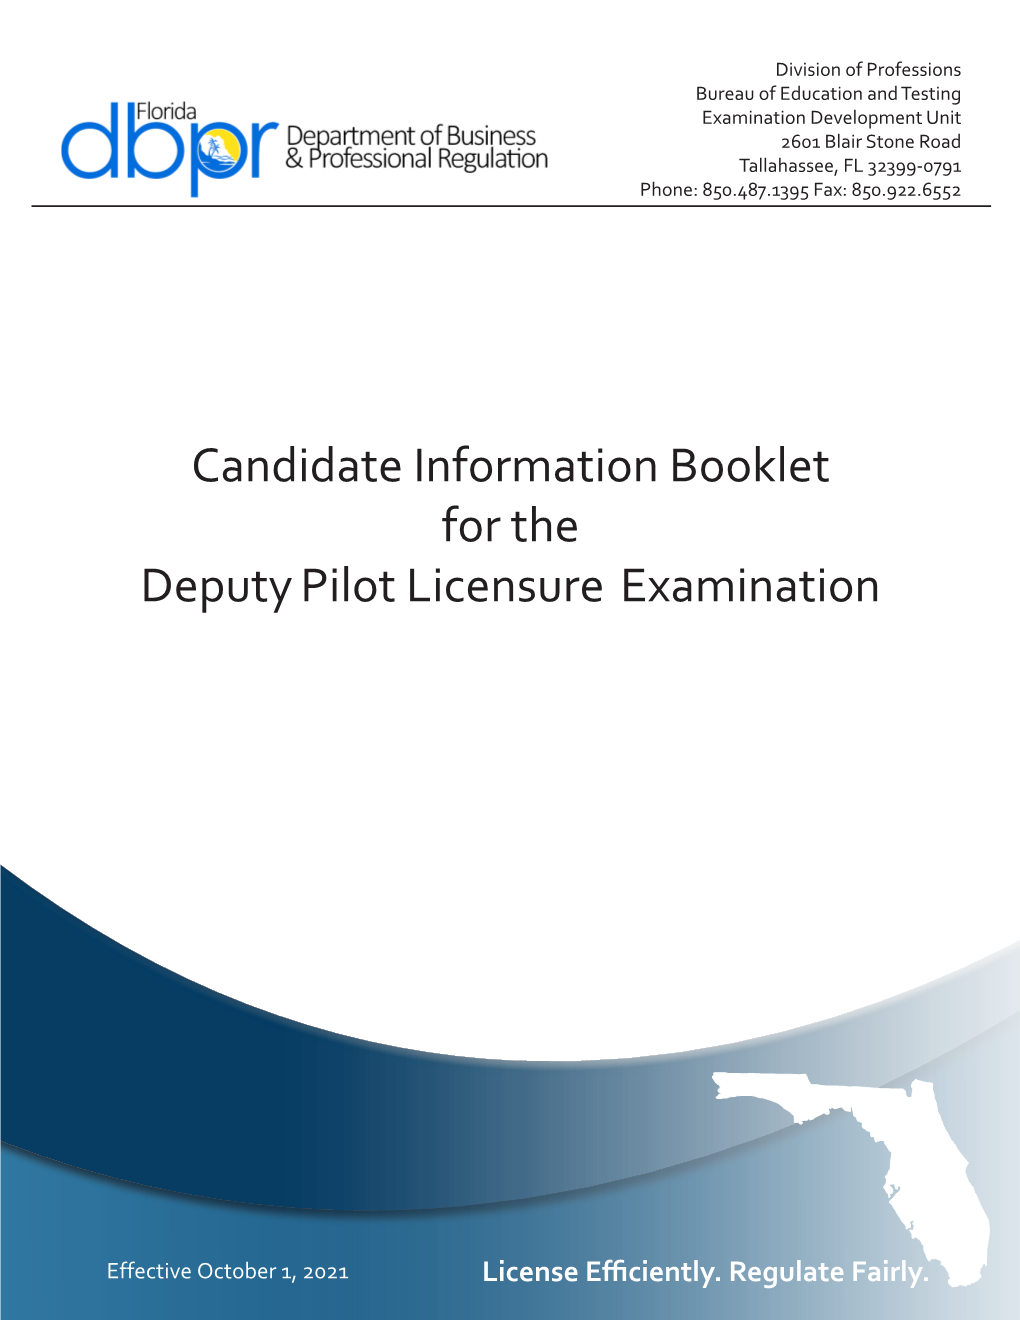 Candidate Information Booklet for the Deputy Pilot Licensure Examination